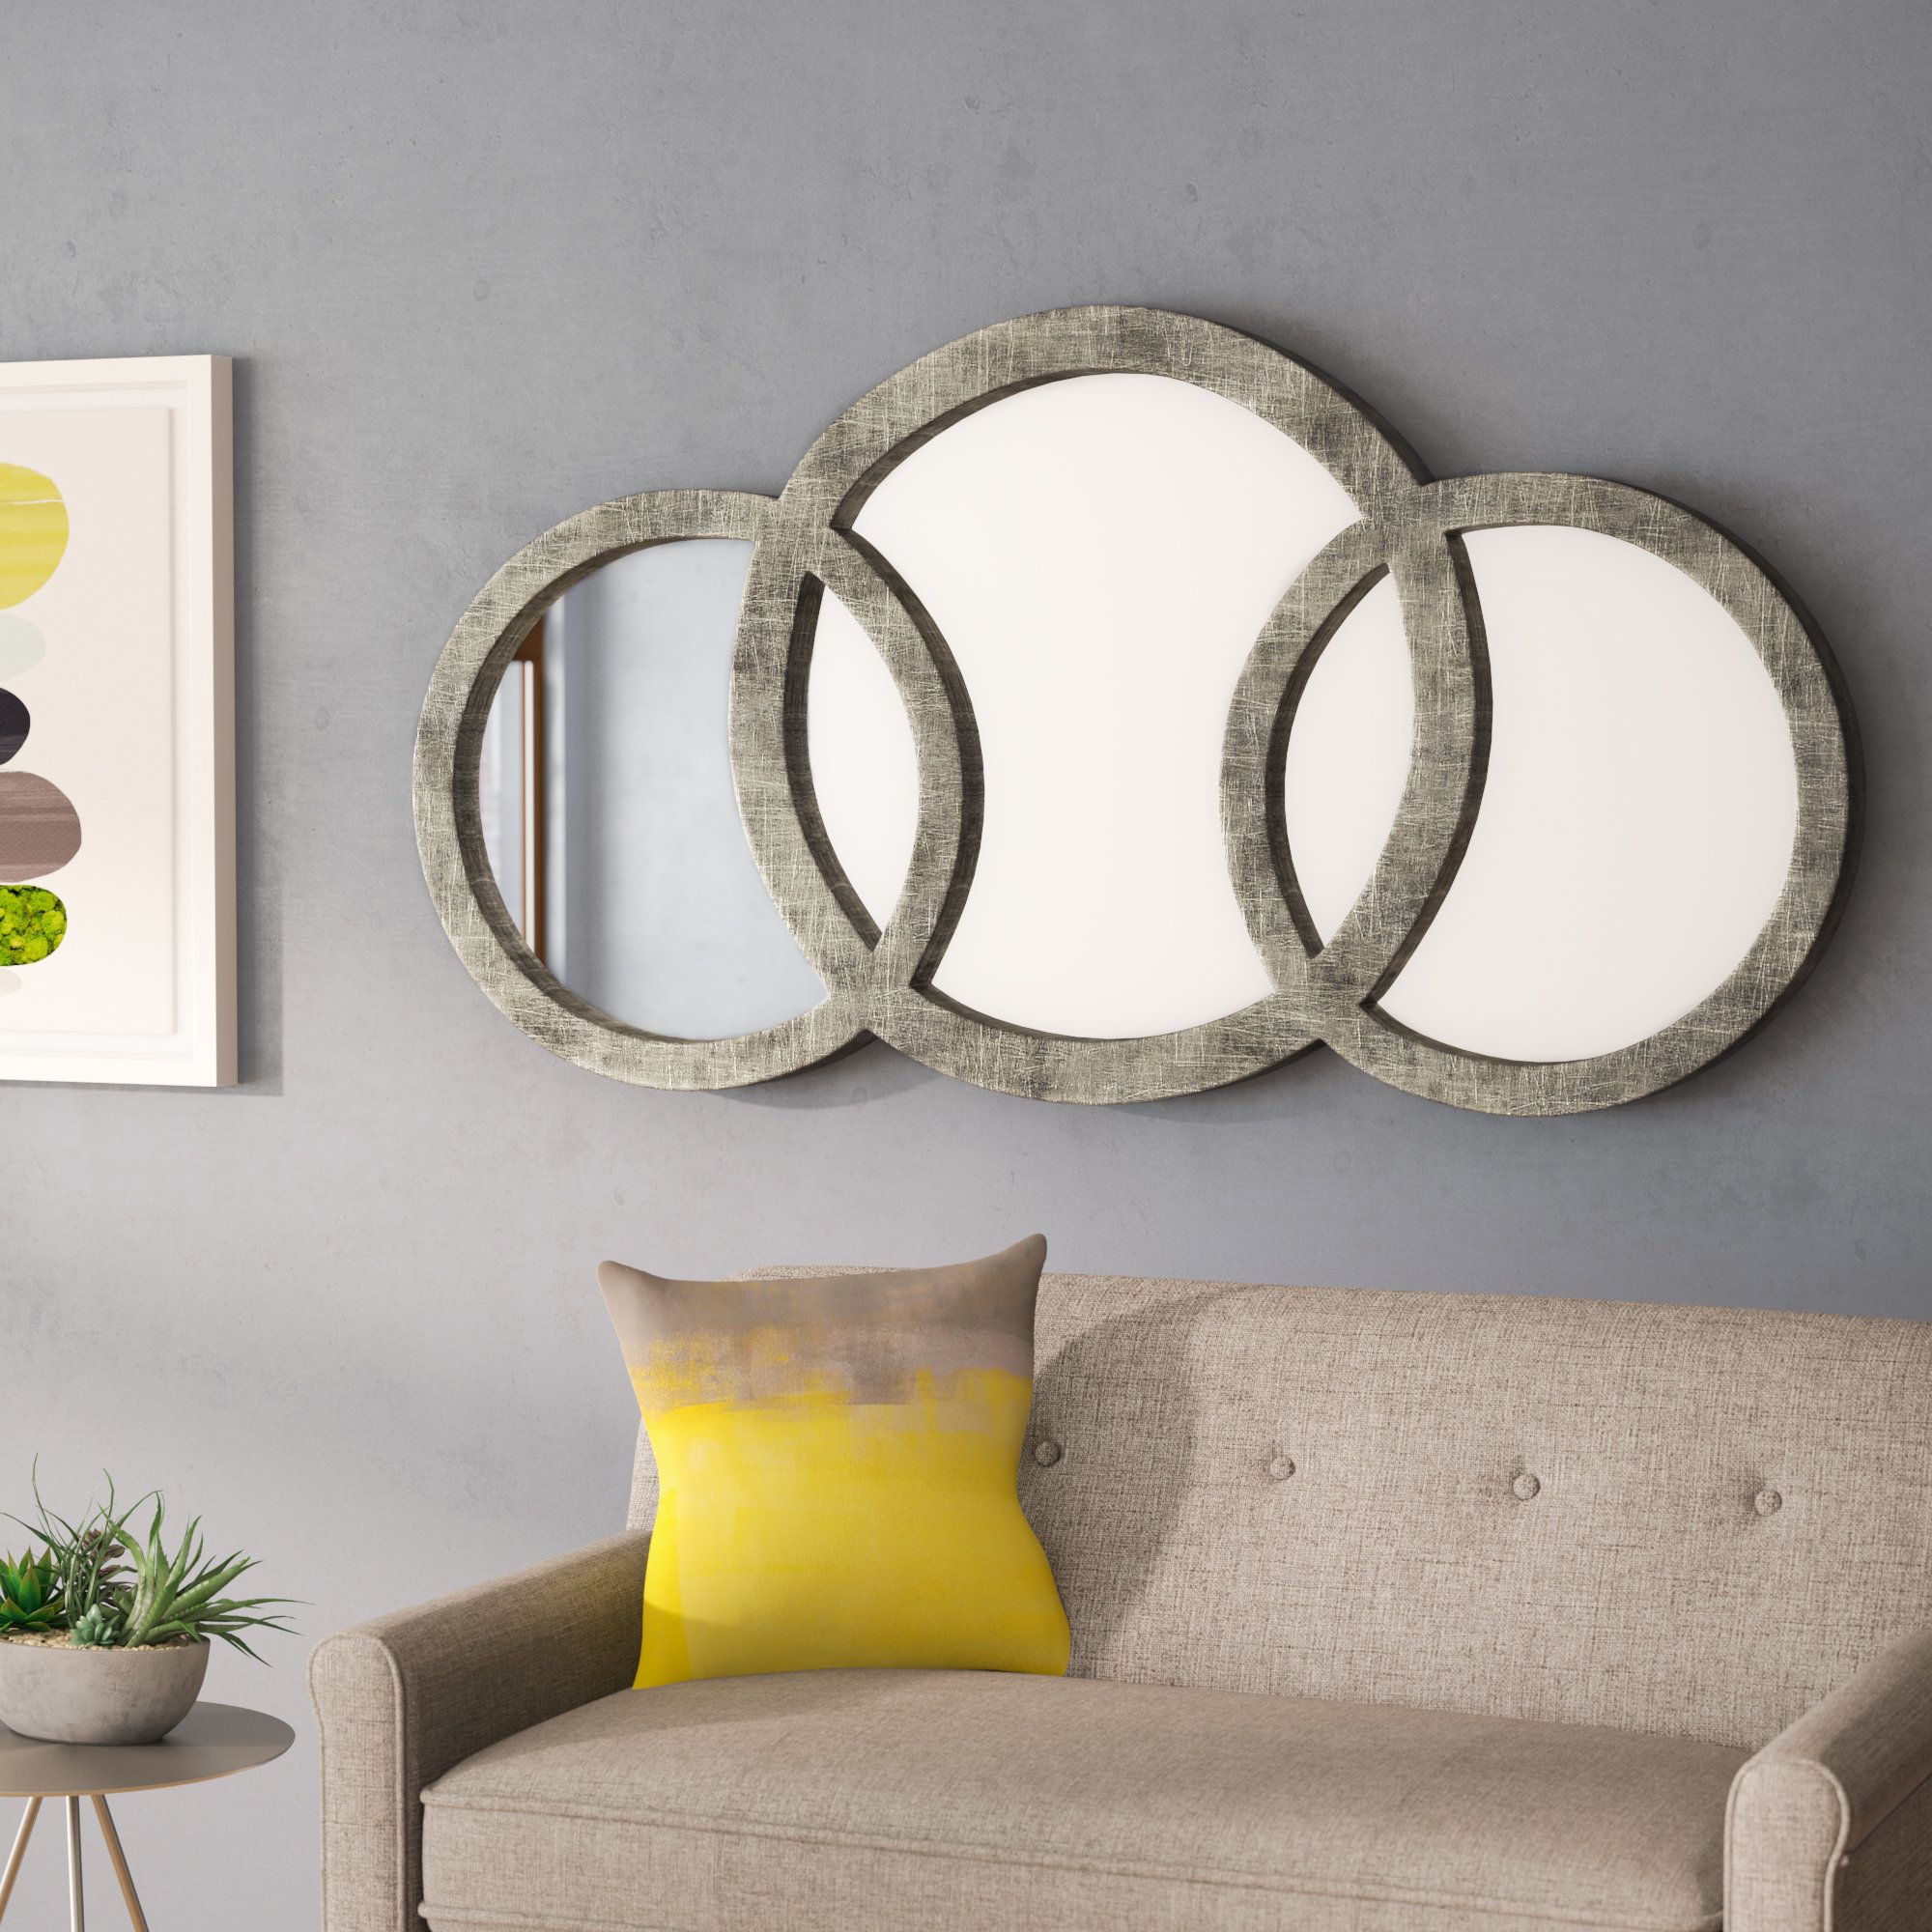 Cromartie Antique Silver Leaf 3 Ring Mirror Within Best And Newest Cromartie Tree Branch Wall Mirrors (View 6 of 20)